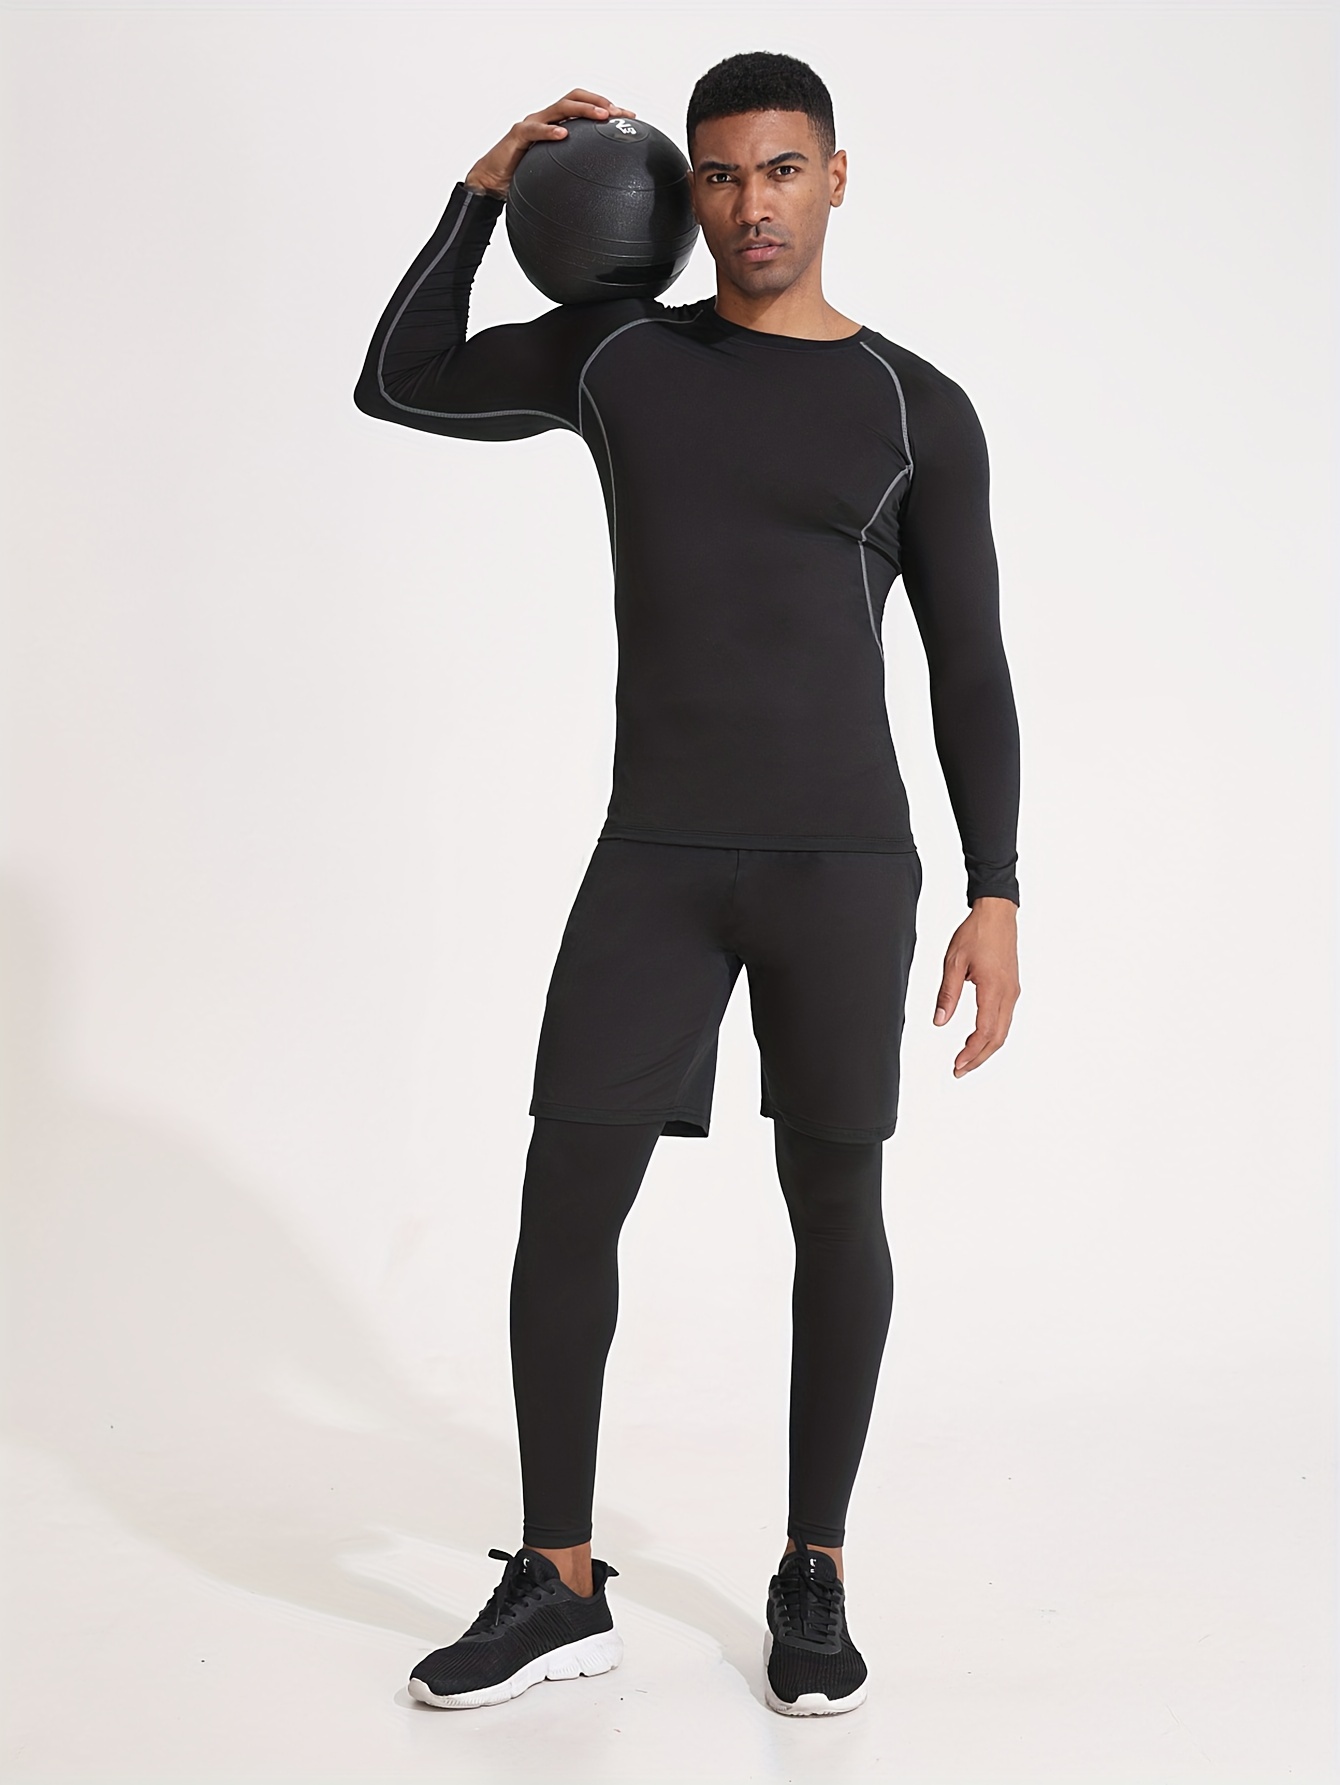 Men Quick-Dry Fitness Long Sleeve UV Protection Tights Gym Tops Shirt  Clothes for Basketball,Football, Soccer 